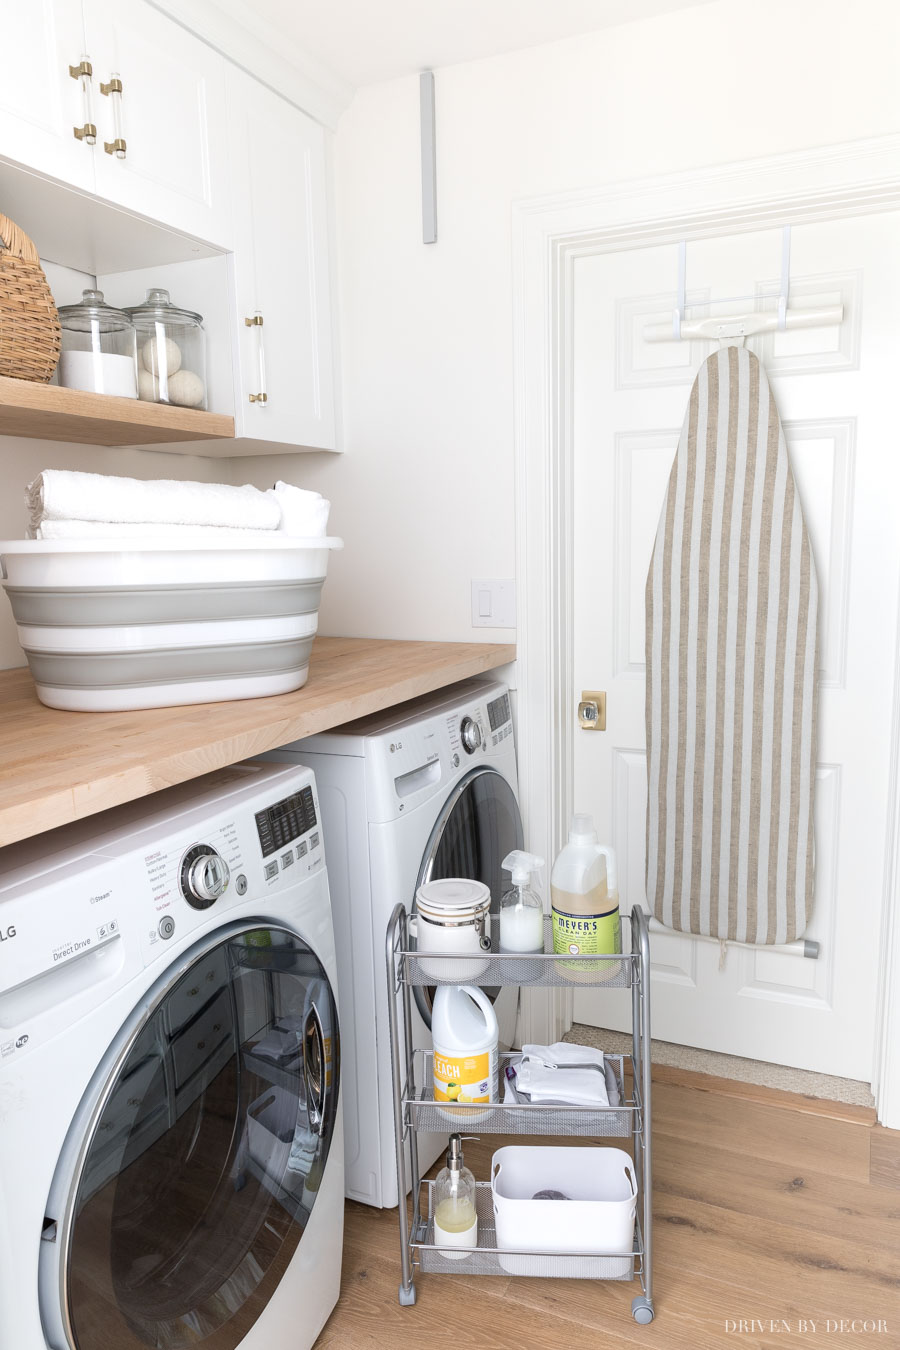 Laundry Room Storage Ideas To Make the Most of Your Space! - Driven by Decor